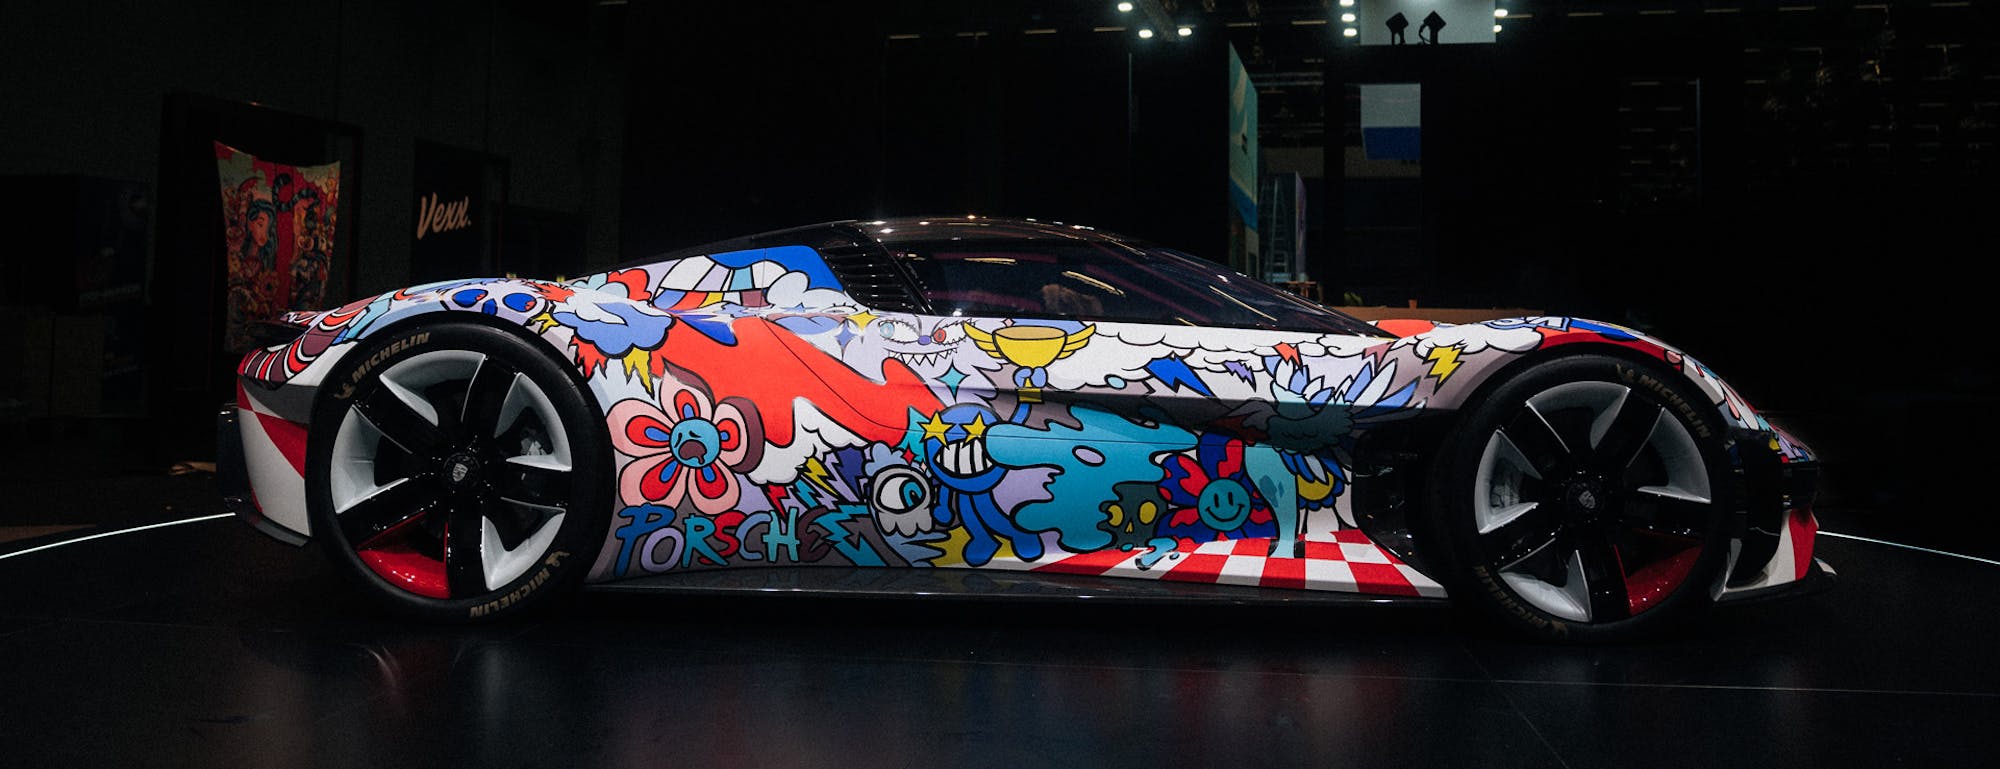 Side view of colourful hand-painted Porsche sportscar